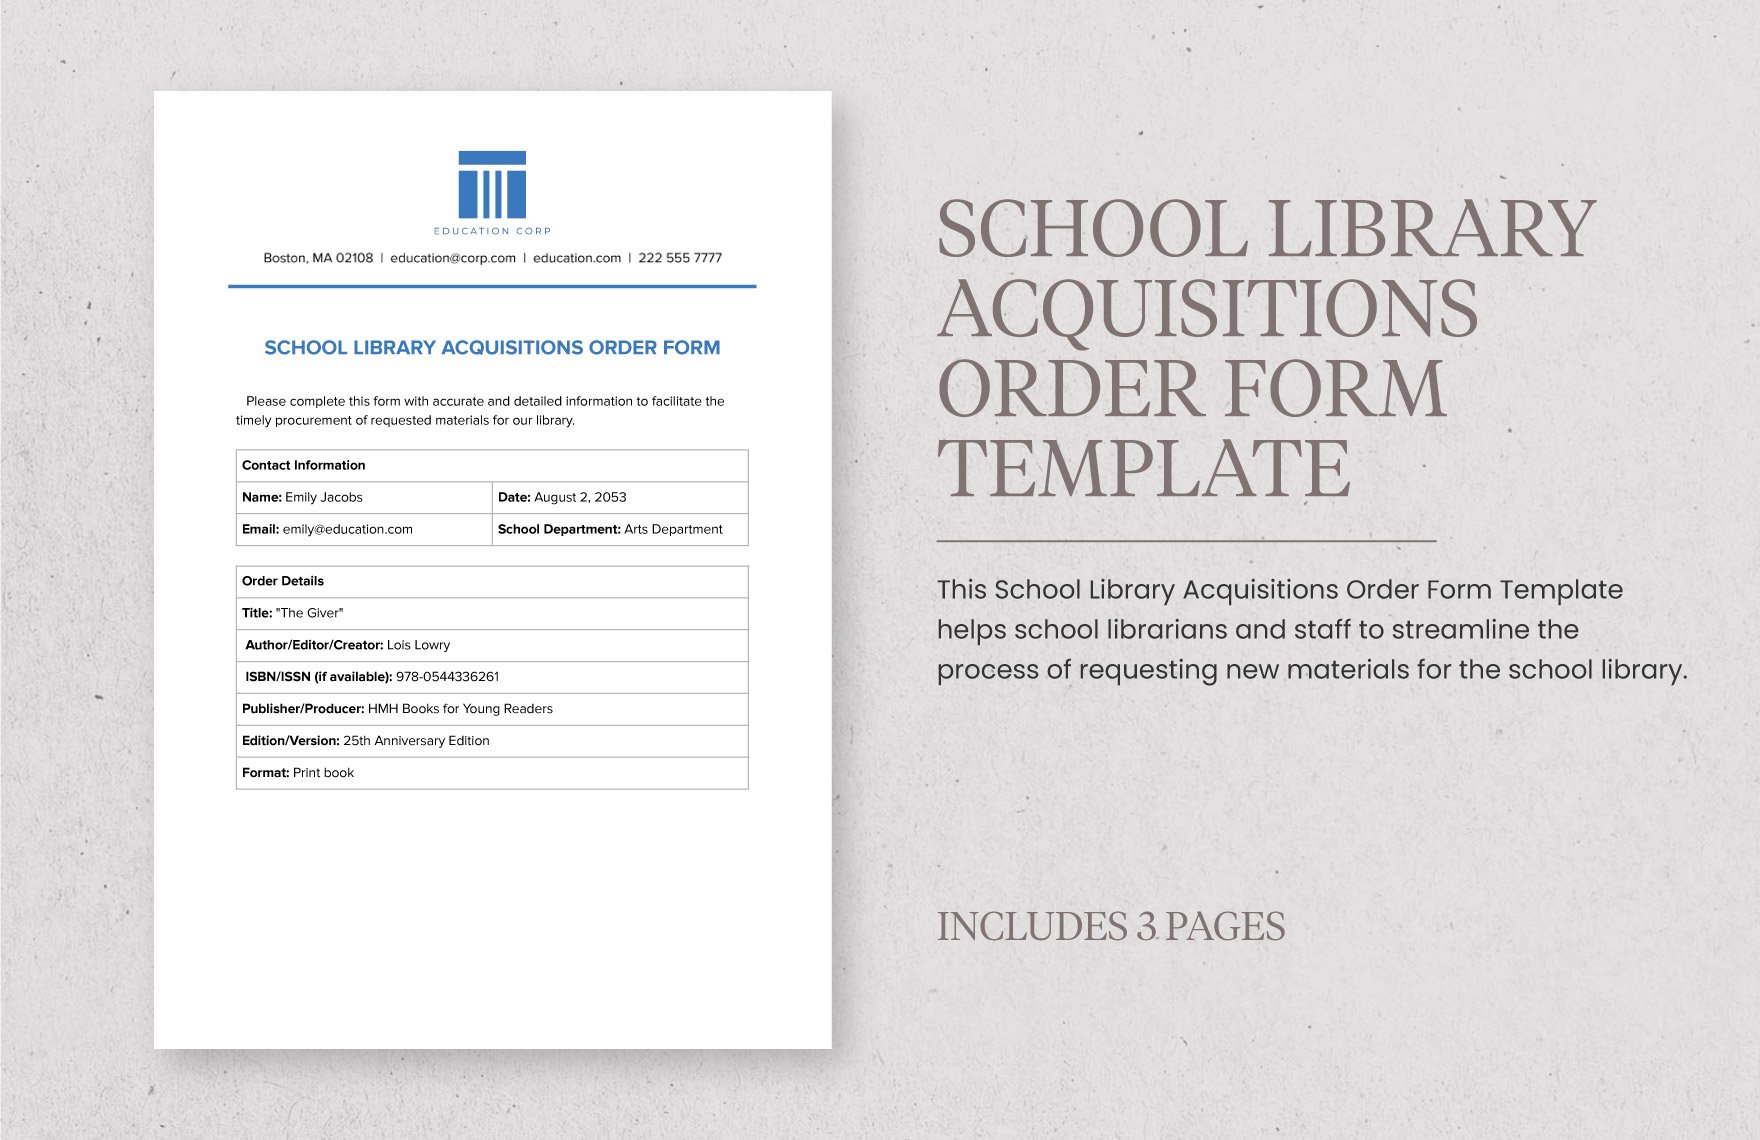 School Library Acquisitions Order Form Template in Word, Google Docs, PDF